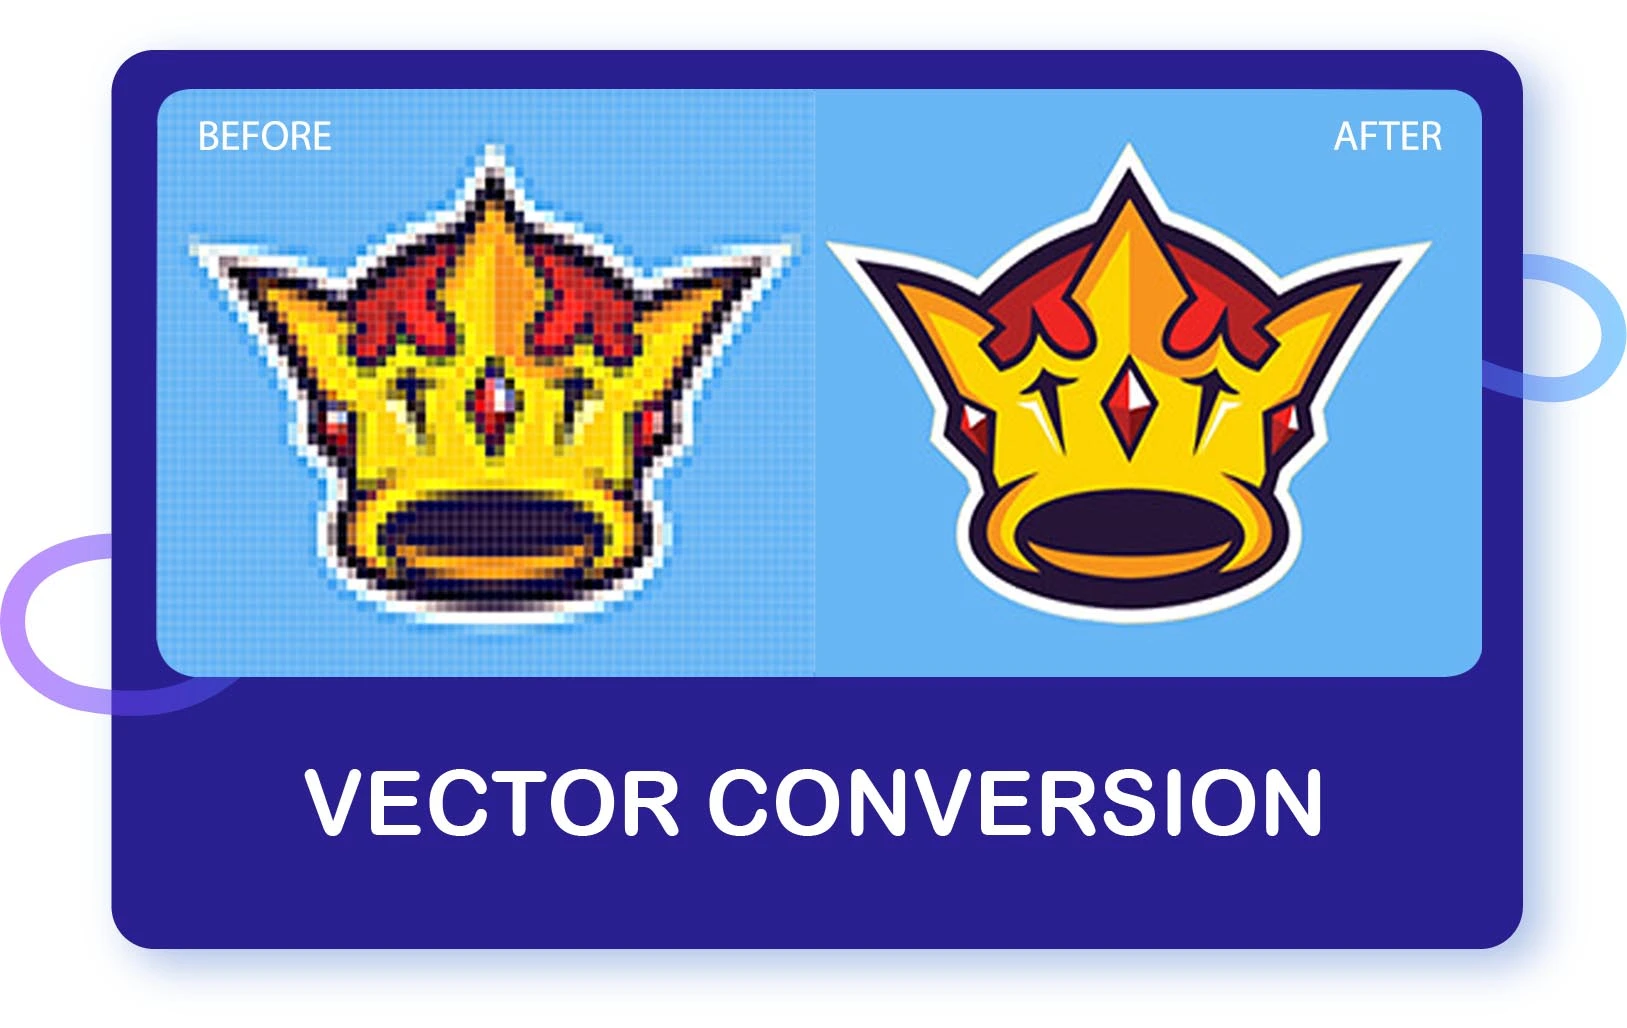 Raster to vector conversion services